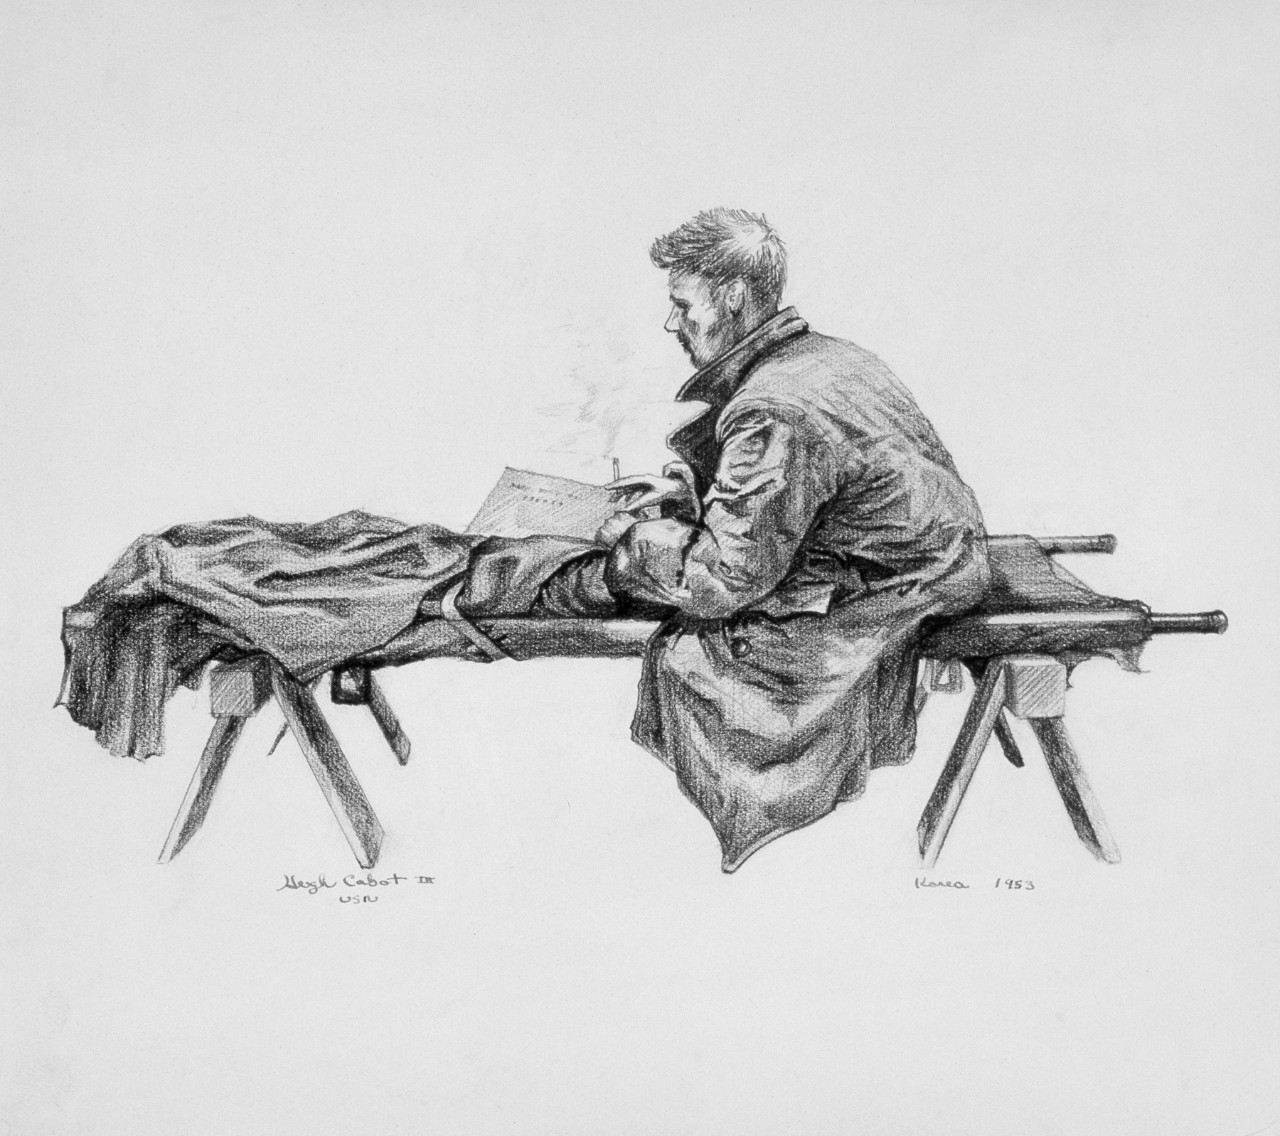 A man sits on a cot reading a letter